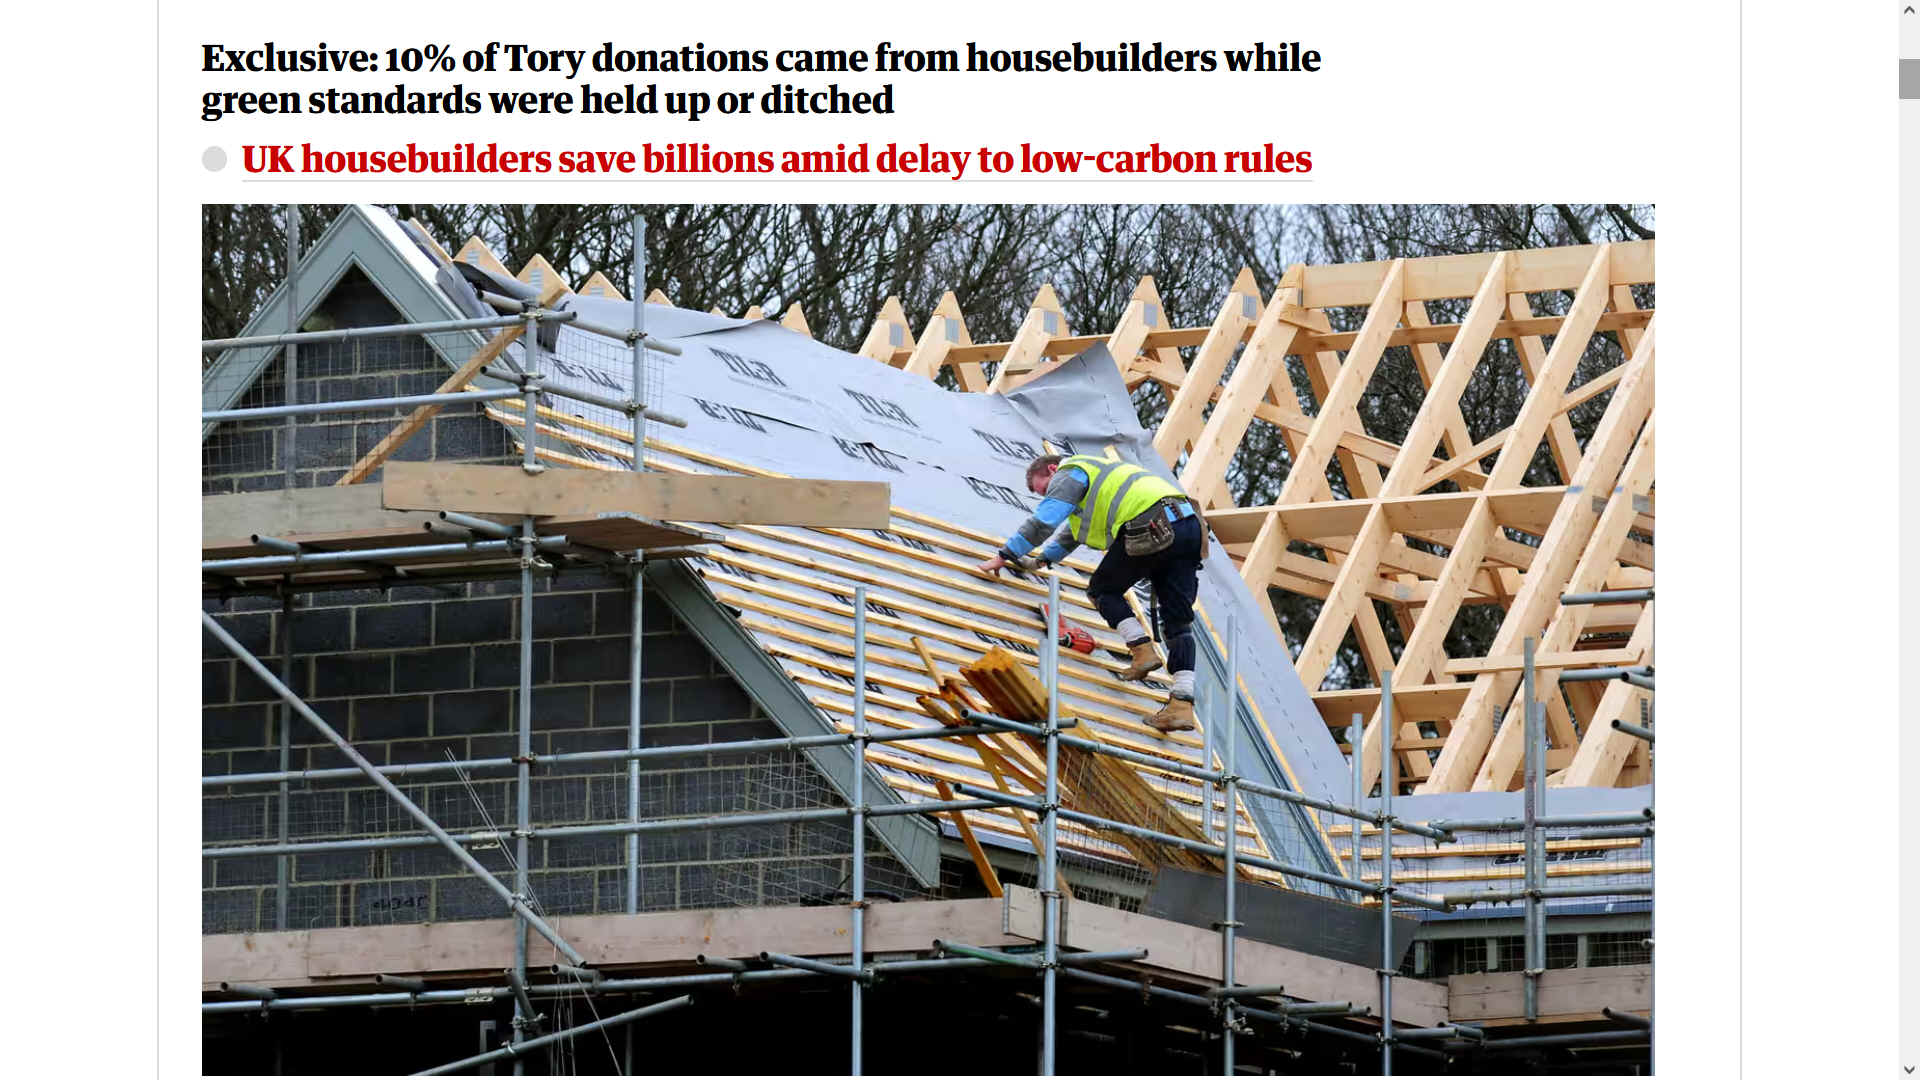 Housebuilders and property developers have benefited by billions of pounds from delays to low-carbon building regulations in the past eight years of Tory rule, while the sector became one of the biggest sources of donations to the Conservative party.